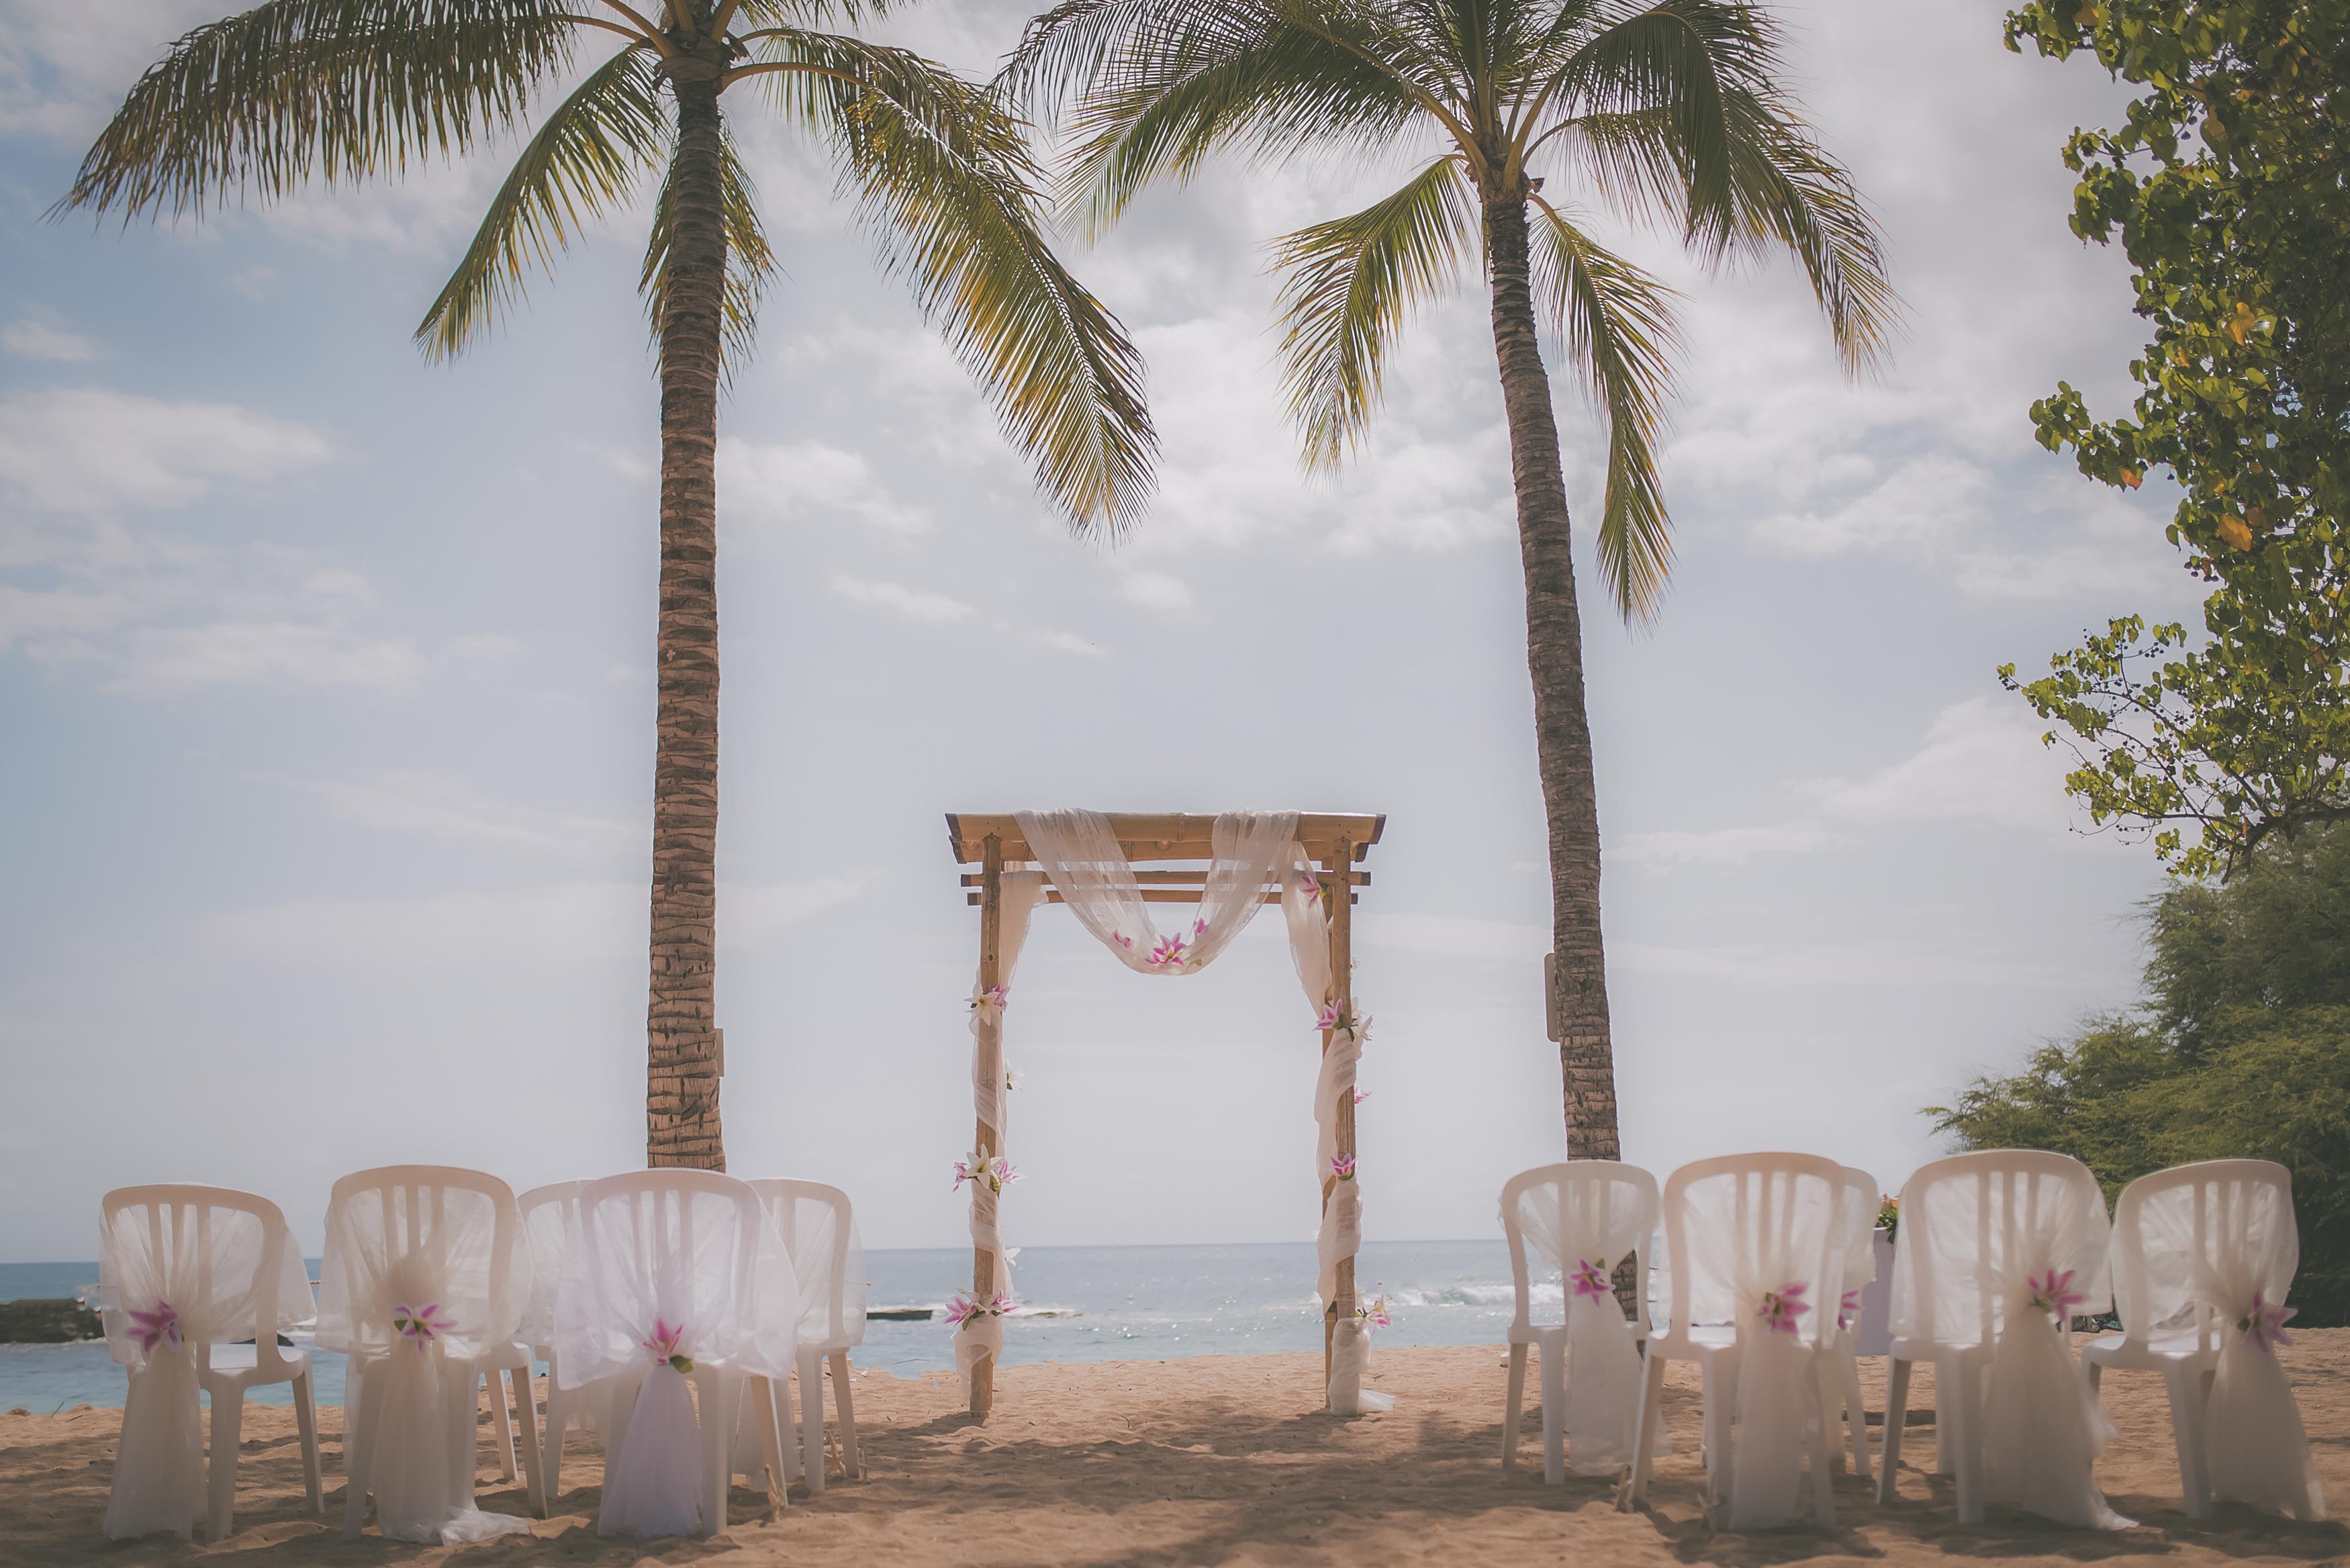 A small wedding ceremony by the sea on the west side of Oahu